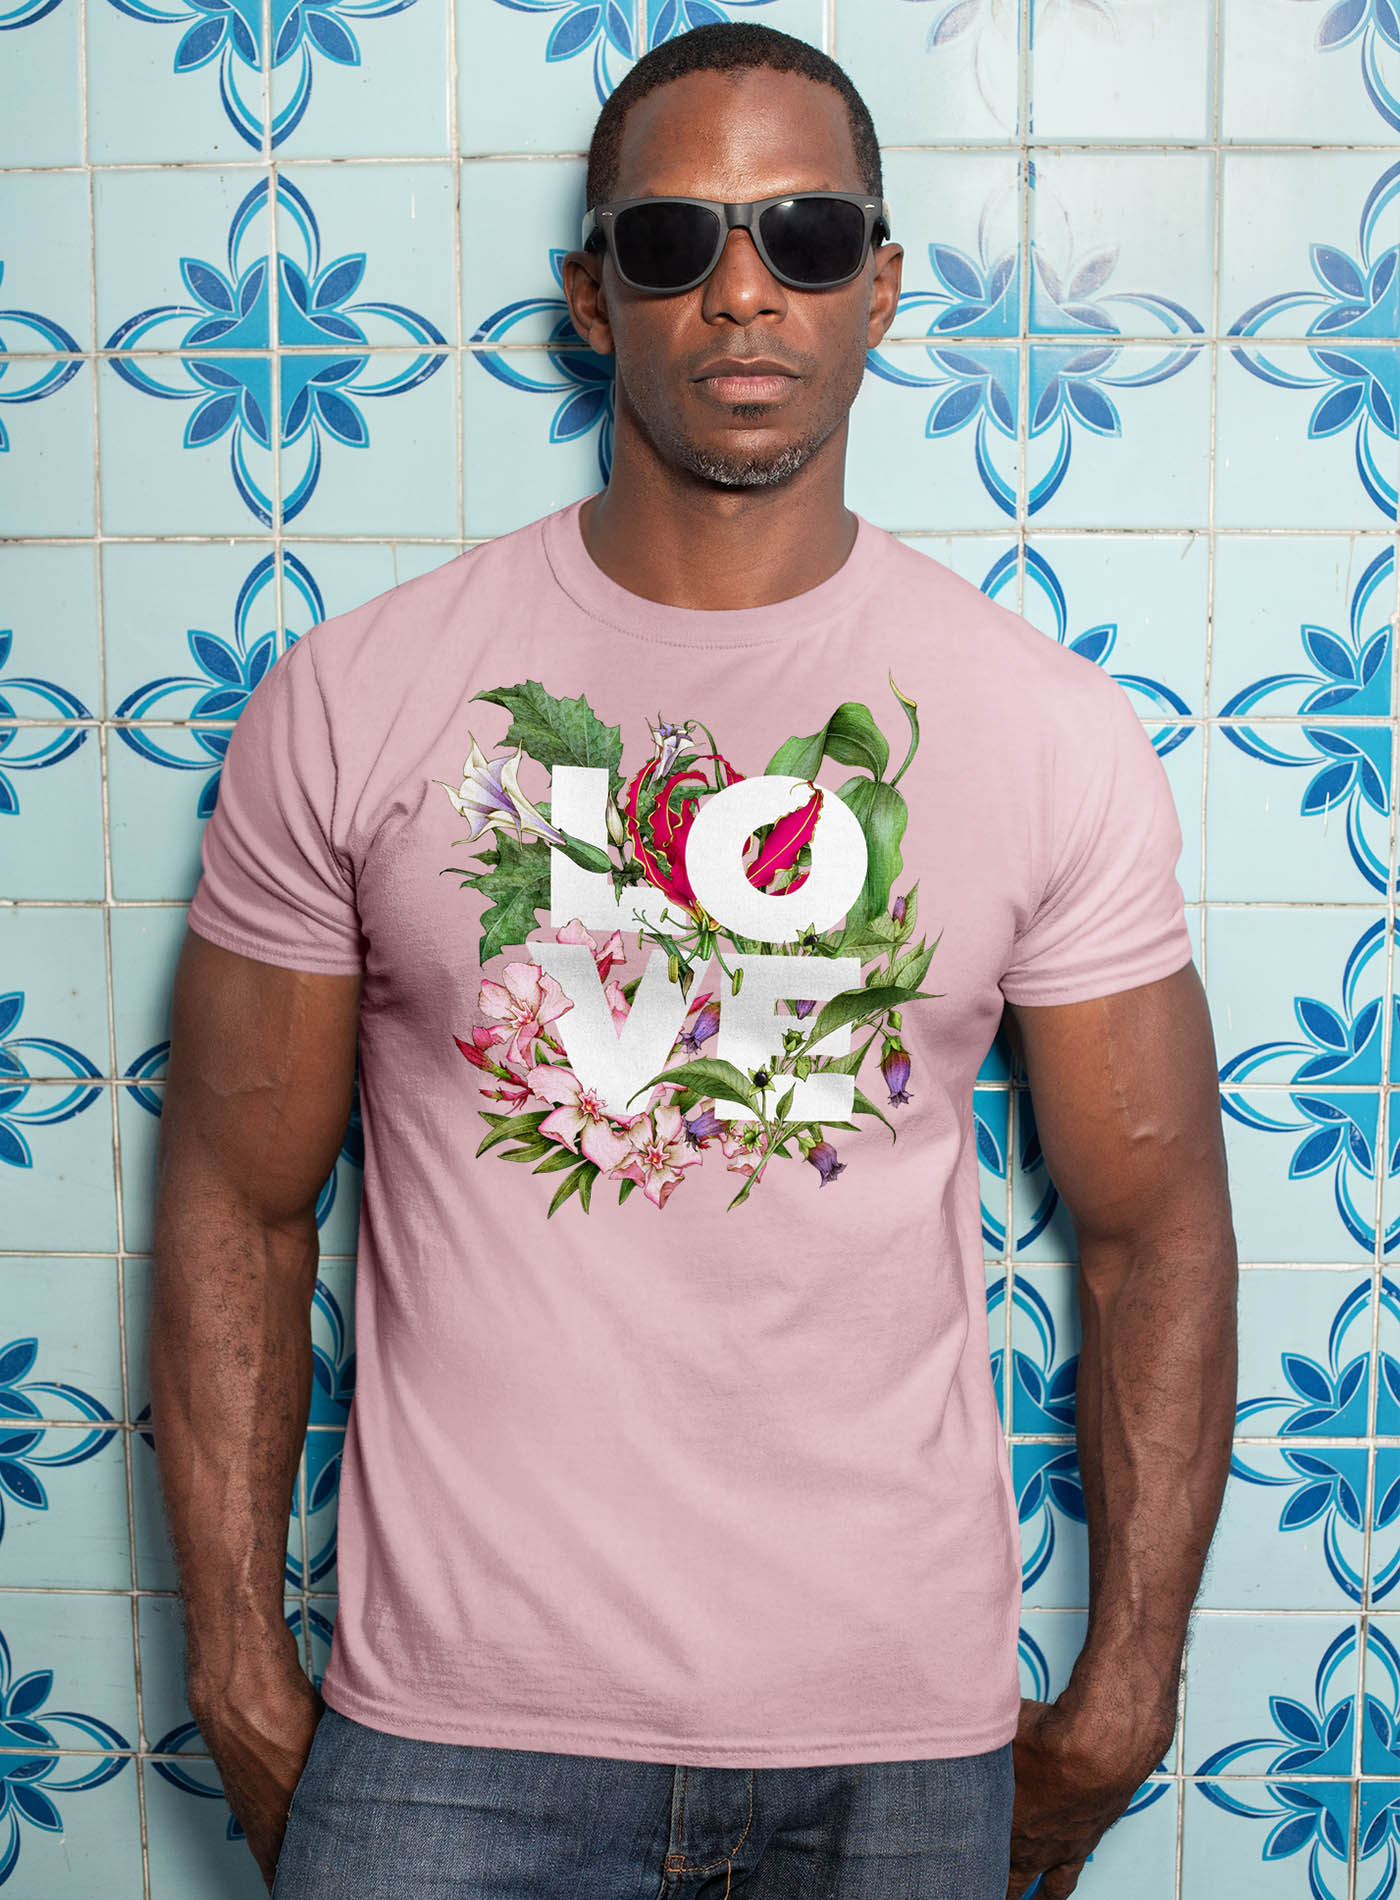 Female modeling a Pink unisex t-shirt featuring the word LOVE surrounded by poisonous flowers such as oleander, fire lily, belladonna and toloache.